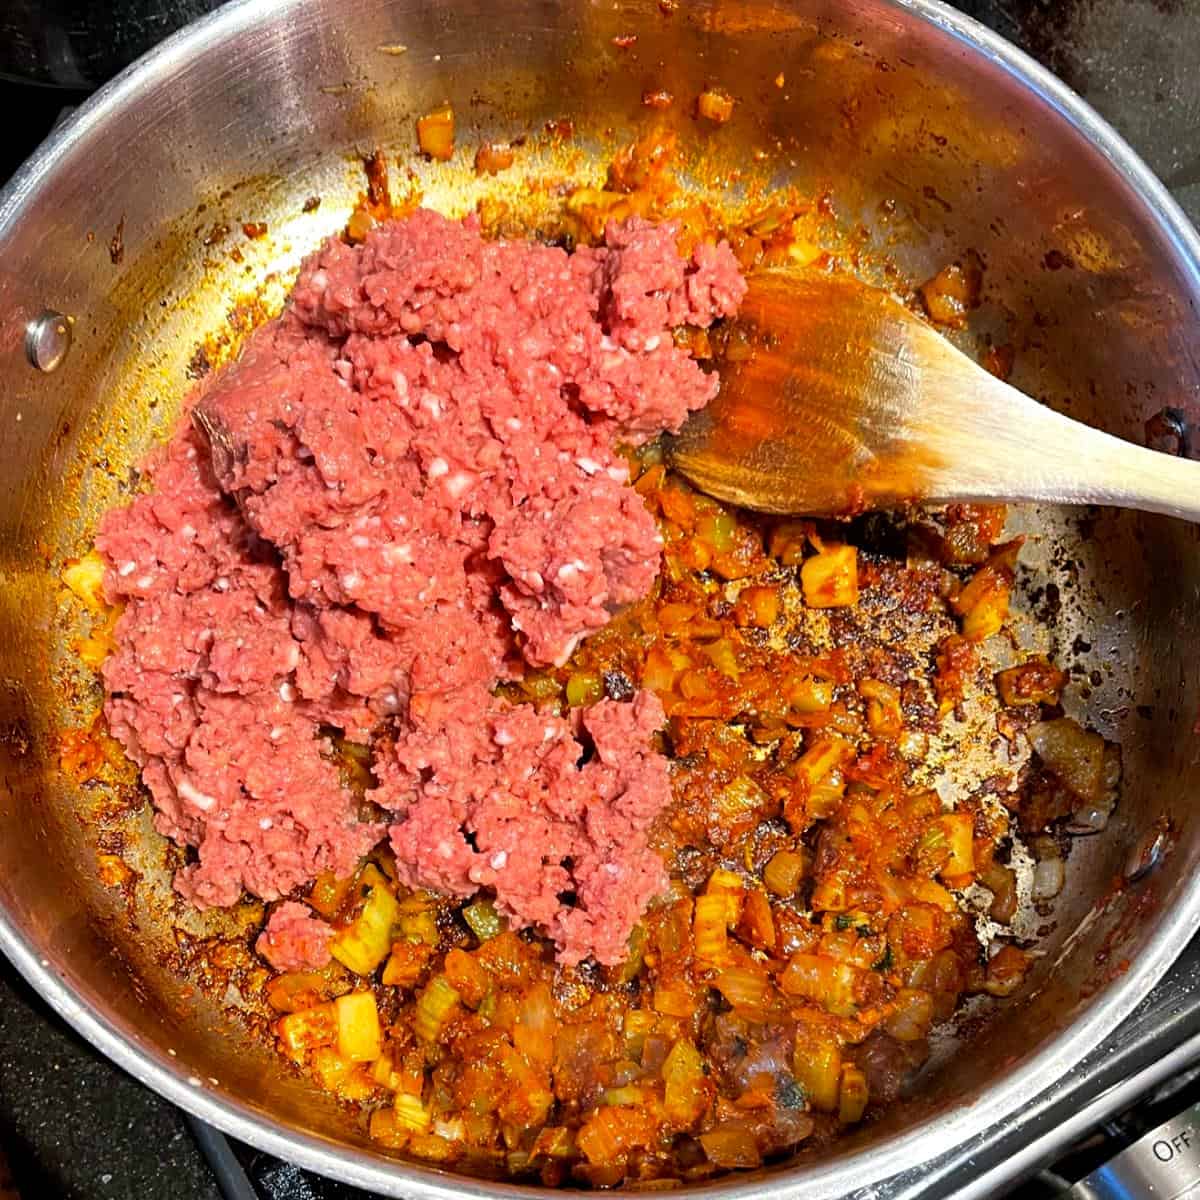 Vegan beef added to veggies and tomato paste in skillet for bell peppers.